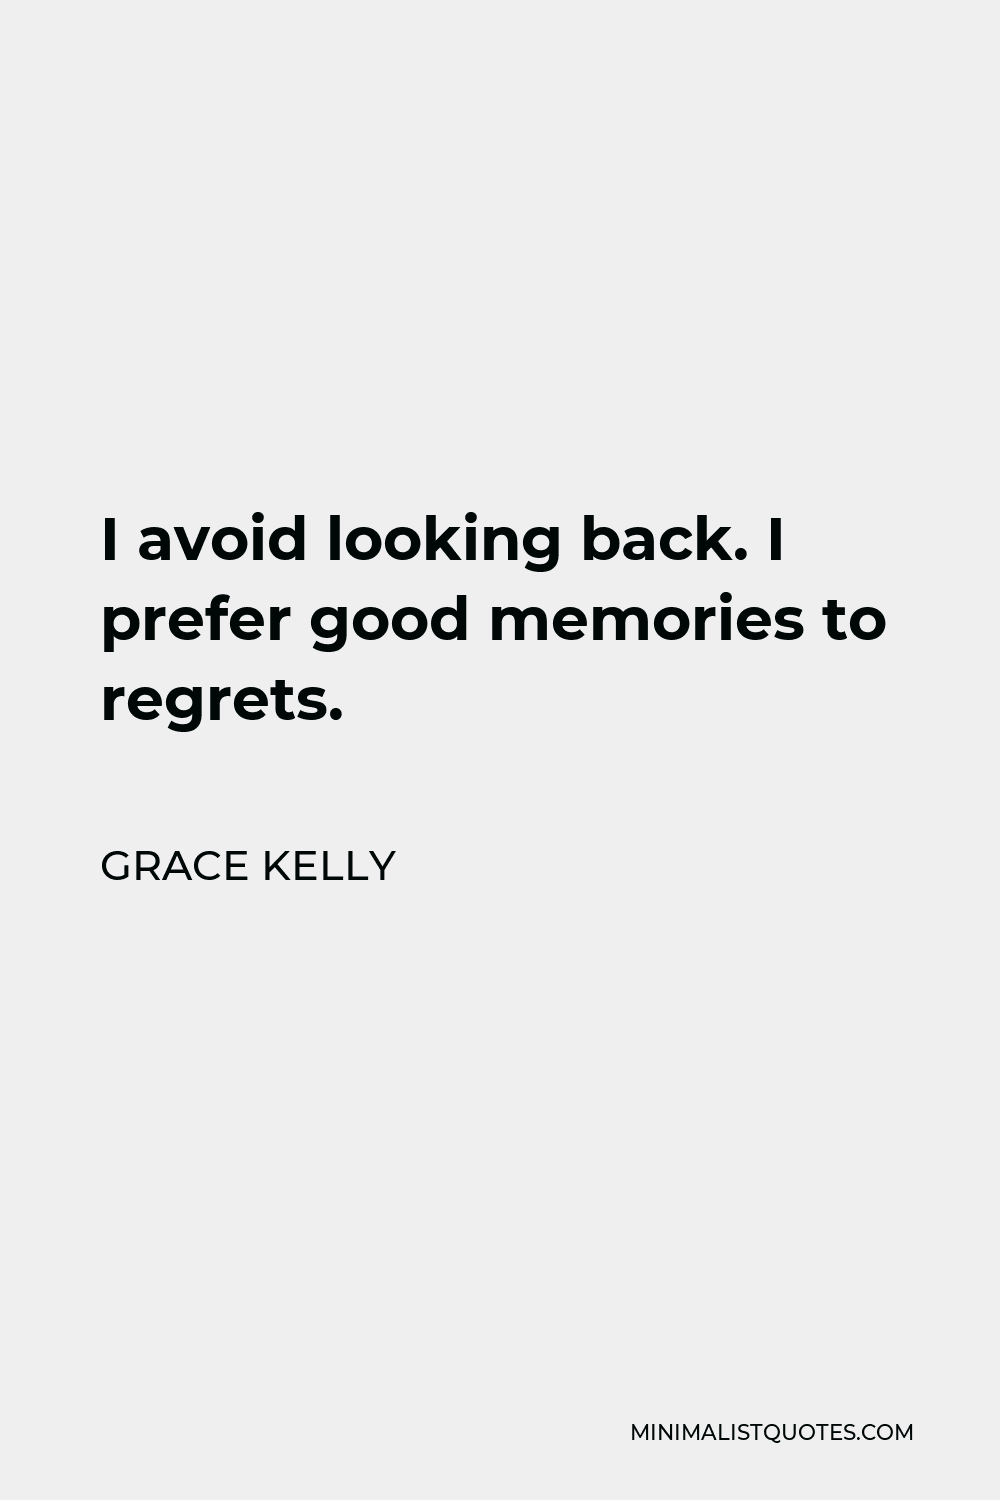 Grace Kelly Quote - I avoid looking back. I prefer good memories to regrets.